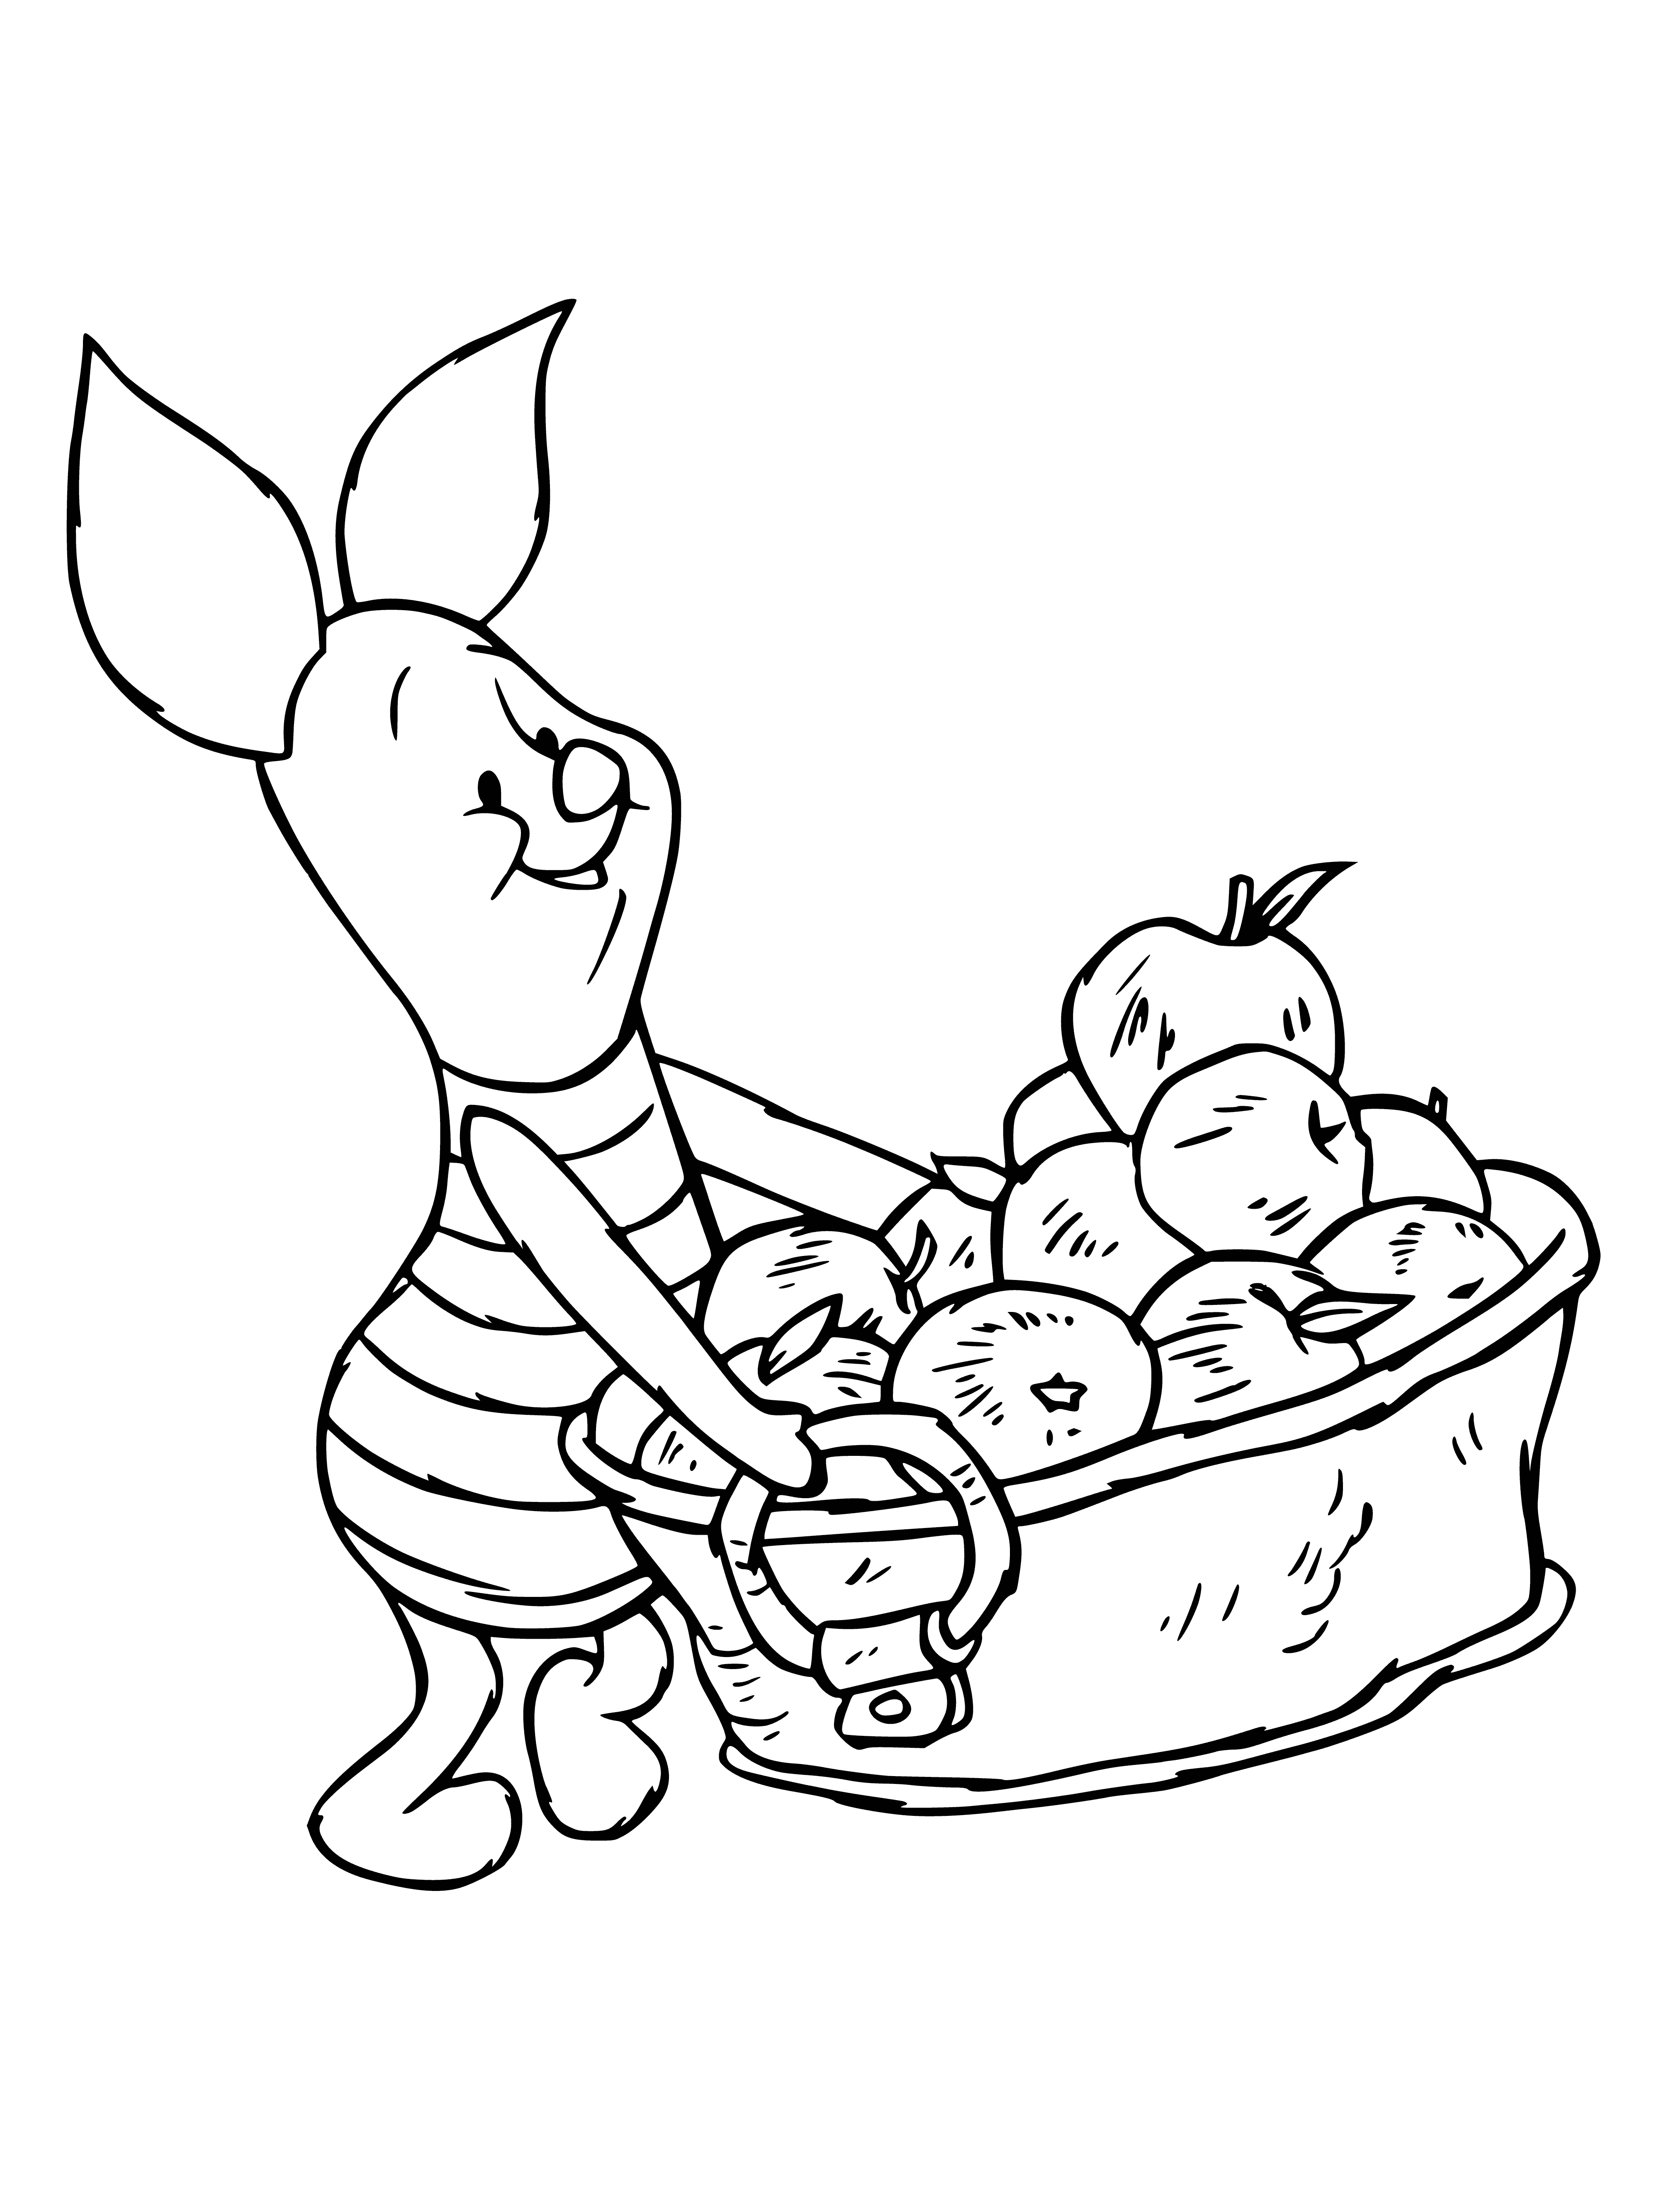 Piggy picked apples coloring page